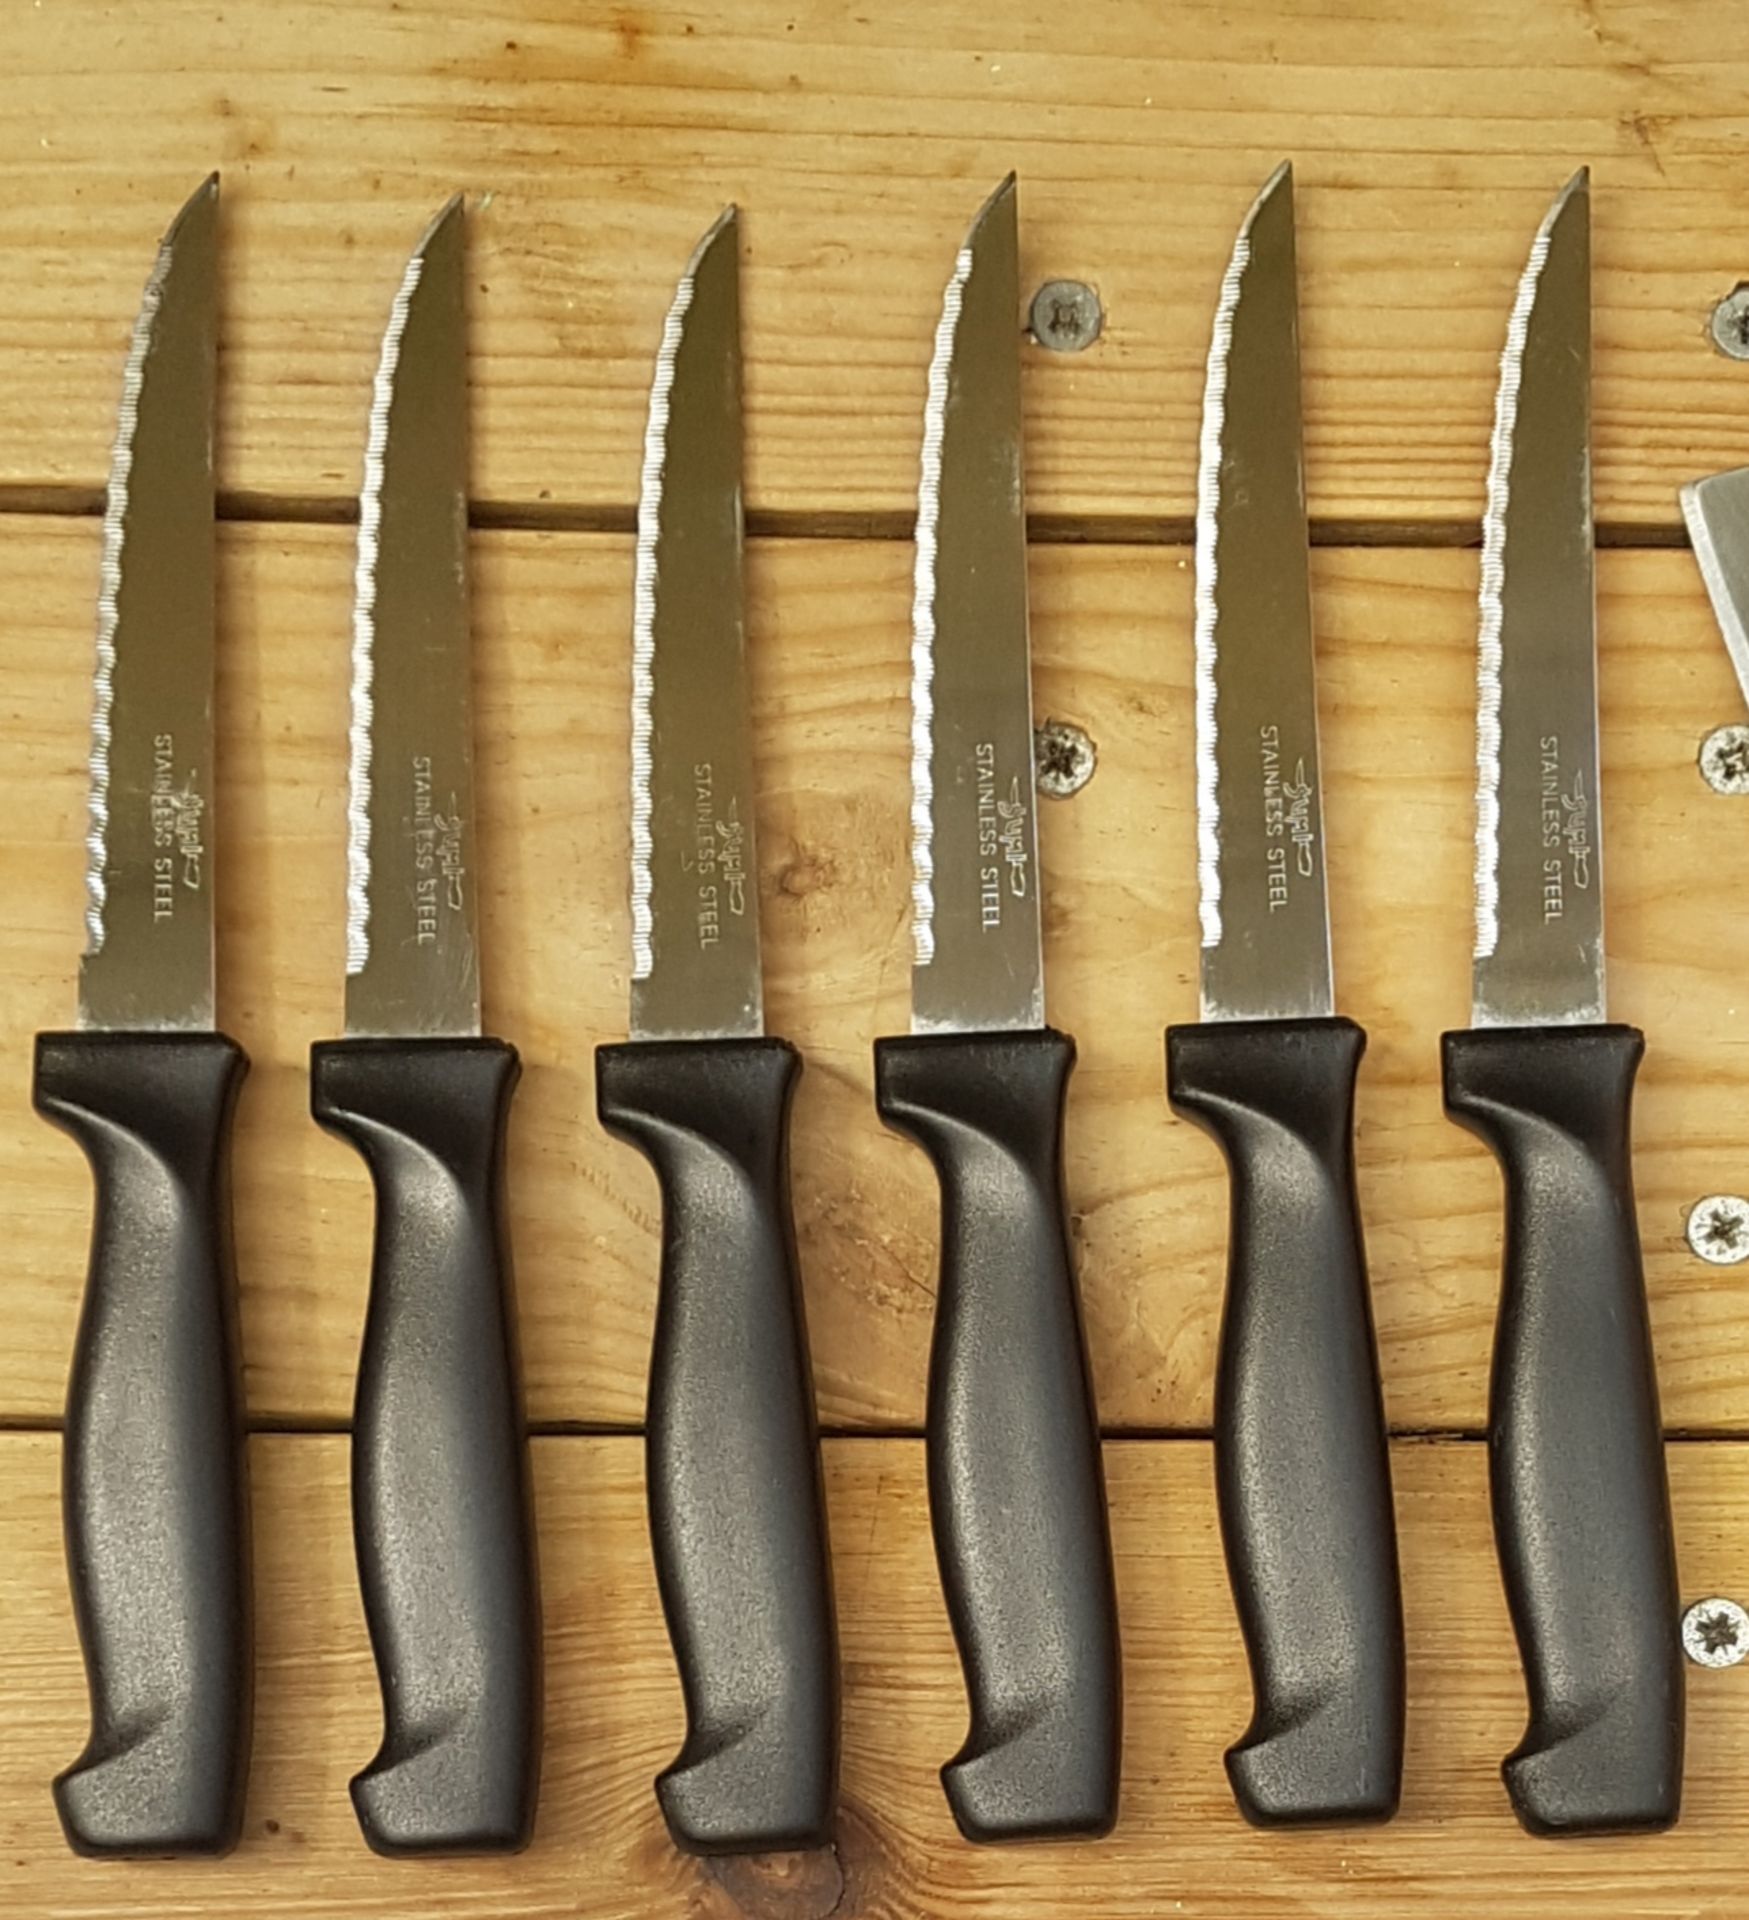 PHB - 100 SETS OF 12 KNIVES, MADE UP OF 6 STEAK KNIVES & 6 OTHER INDIVIDUAL KITCHEN KNIVES *NO VAT* - Image 3 of 6